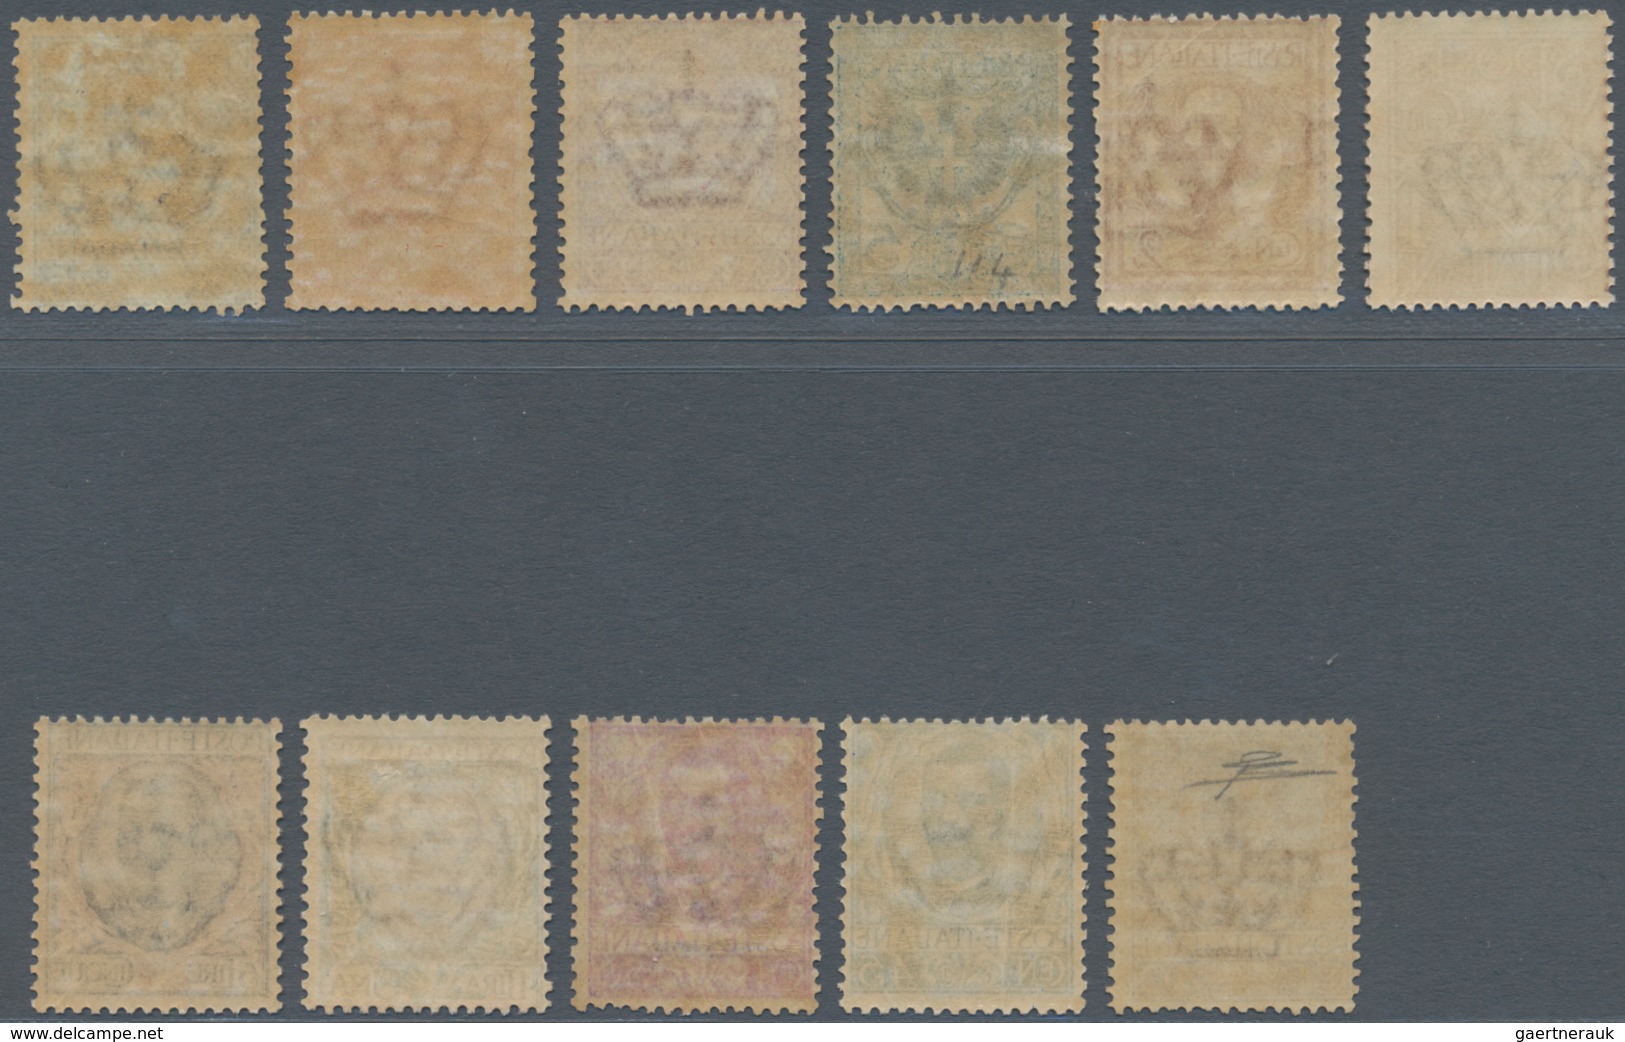 00958 Italien: 1901: "Floreale" Complete Set Of 11 Values, MNH. The 40 Cents With The Certificate Of R. Di - Poststempel